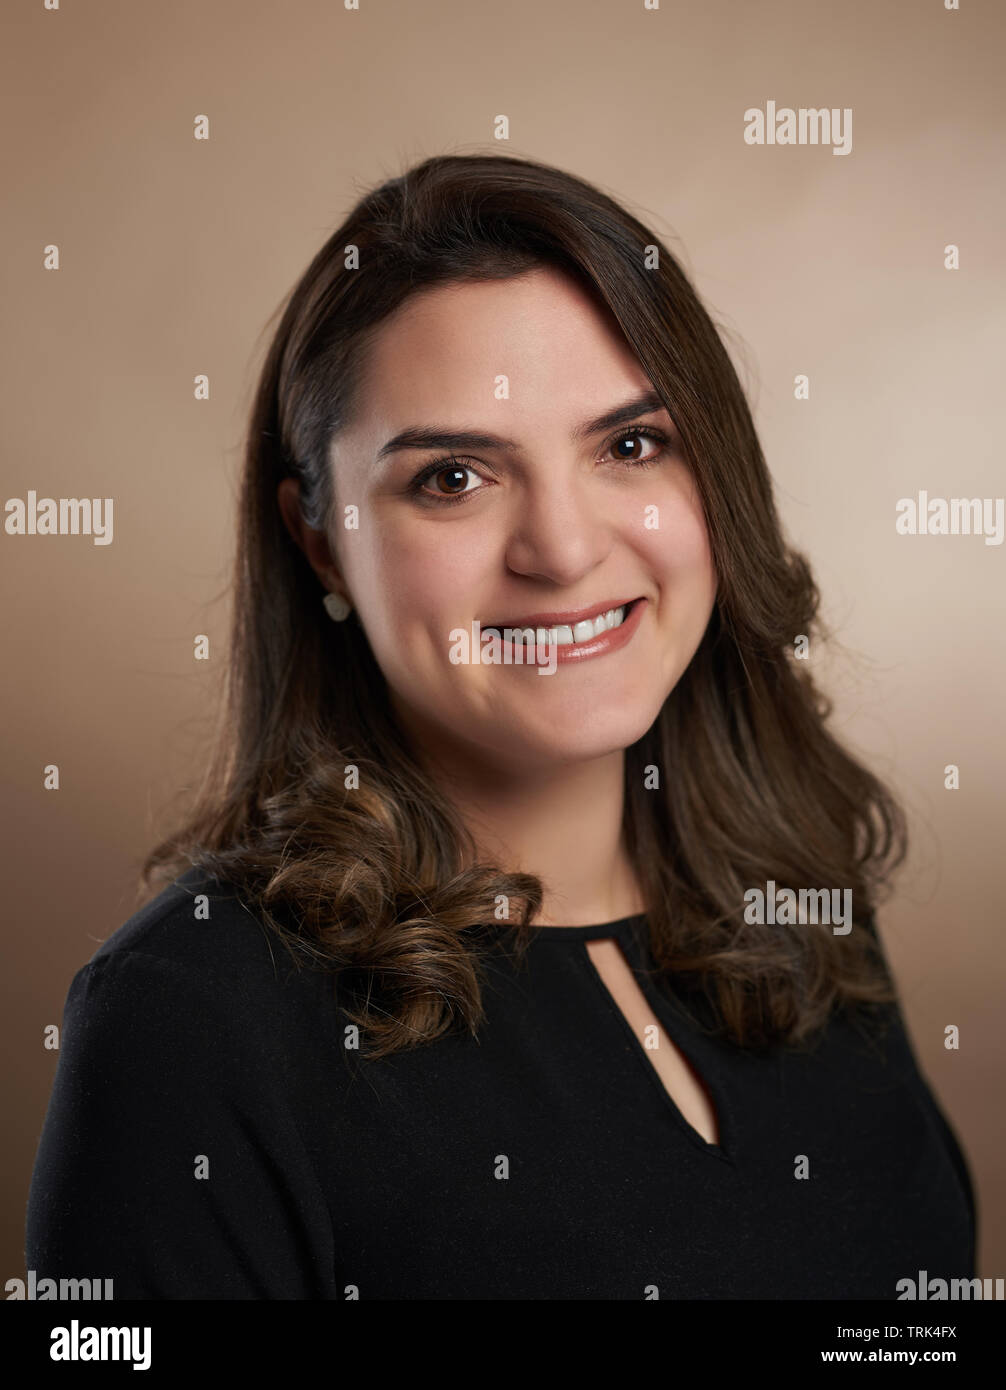 Close up portrait of brunette woman on brown studio background Stock Photo